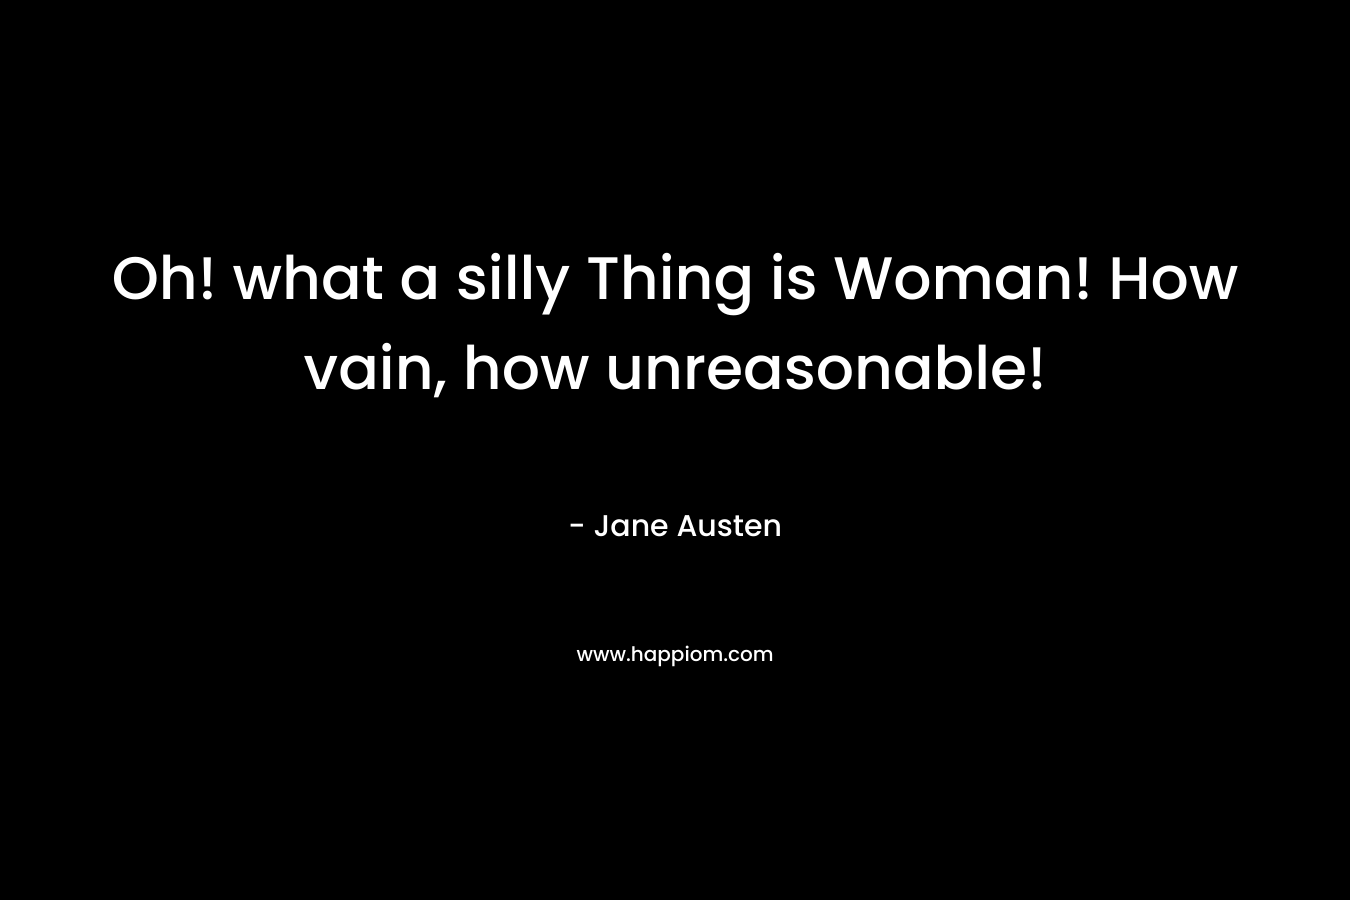 Oh! what a silly Thing is Woman! How vain, how unreasonable!